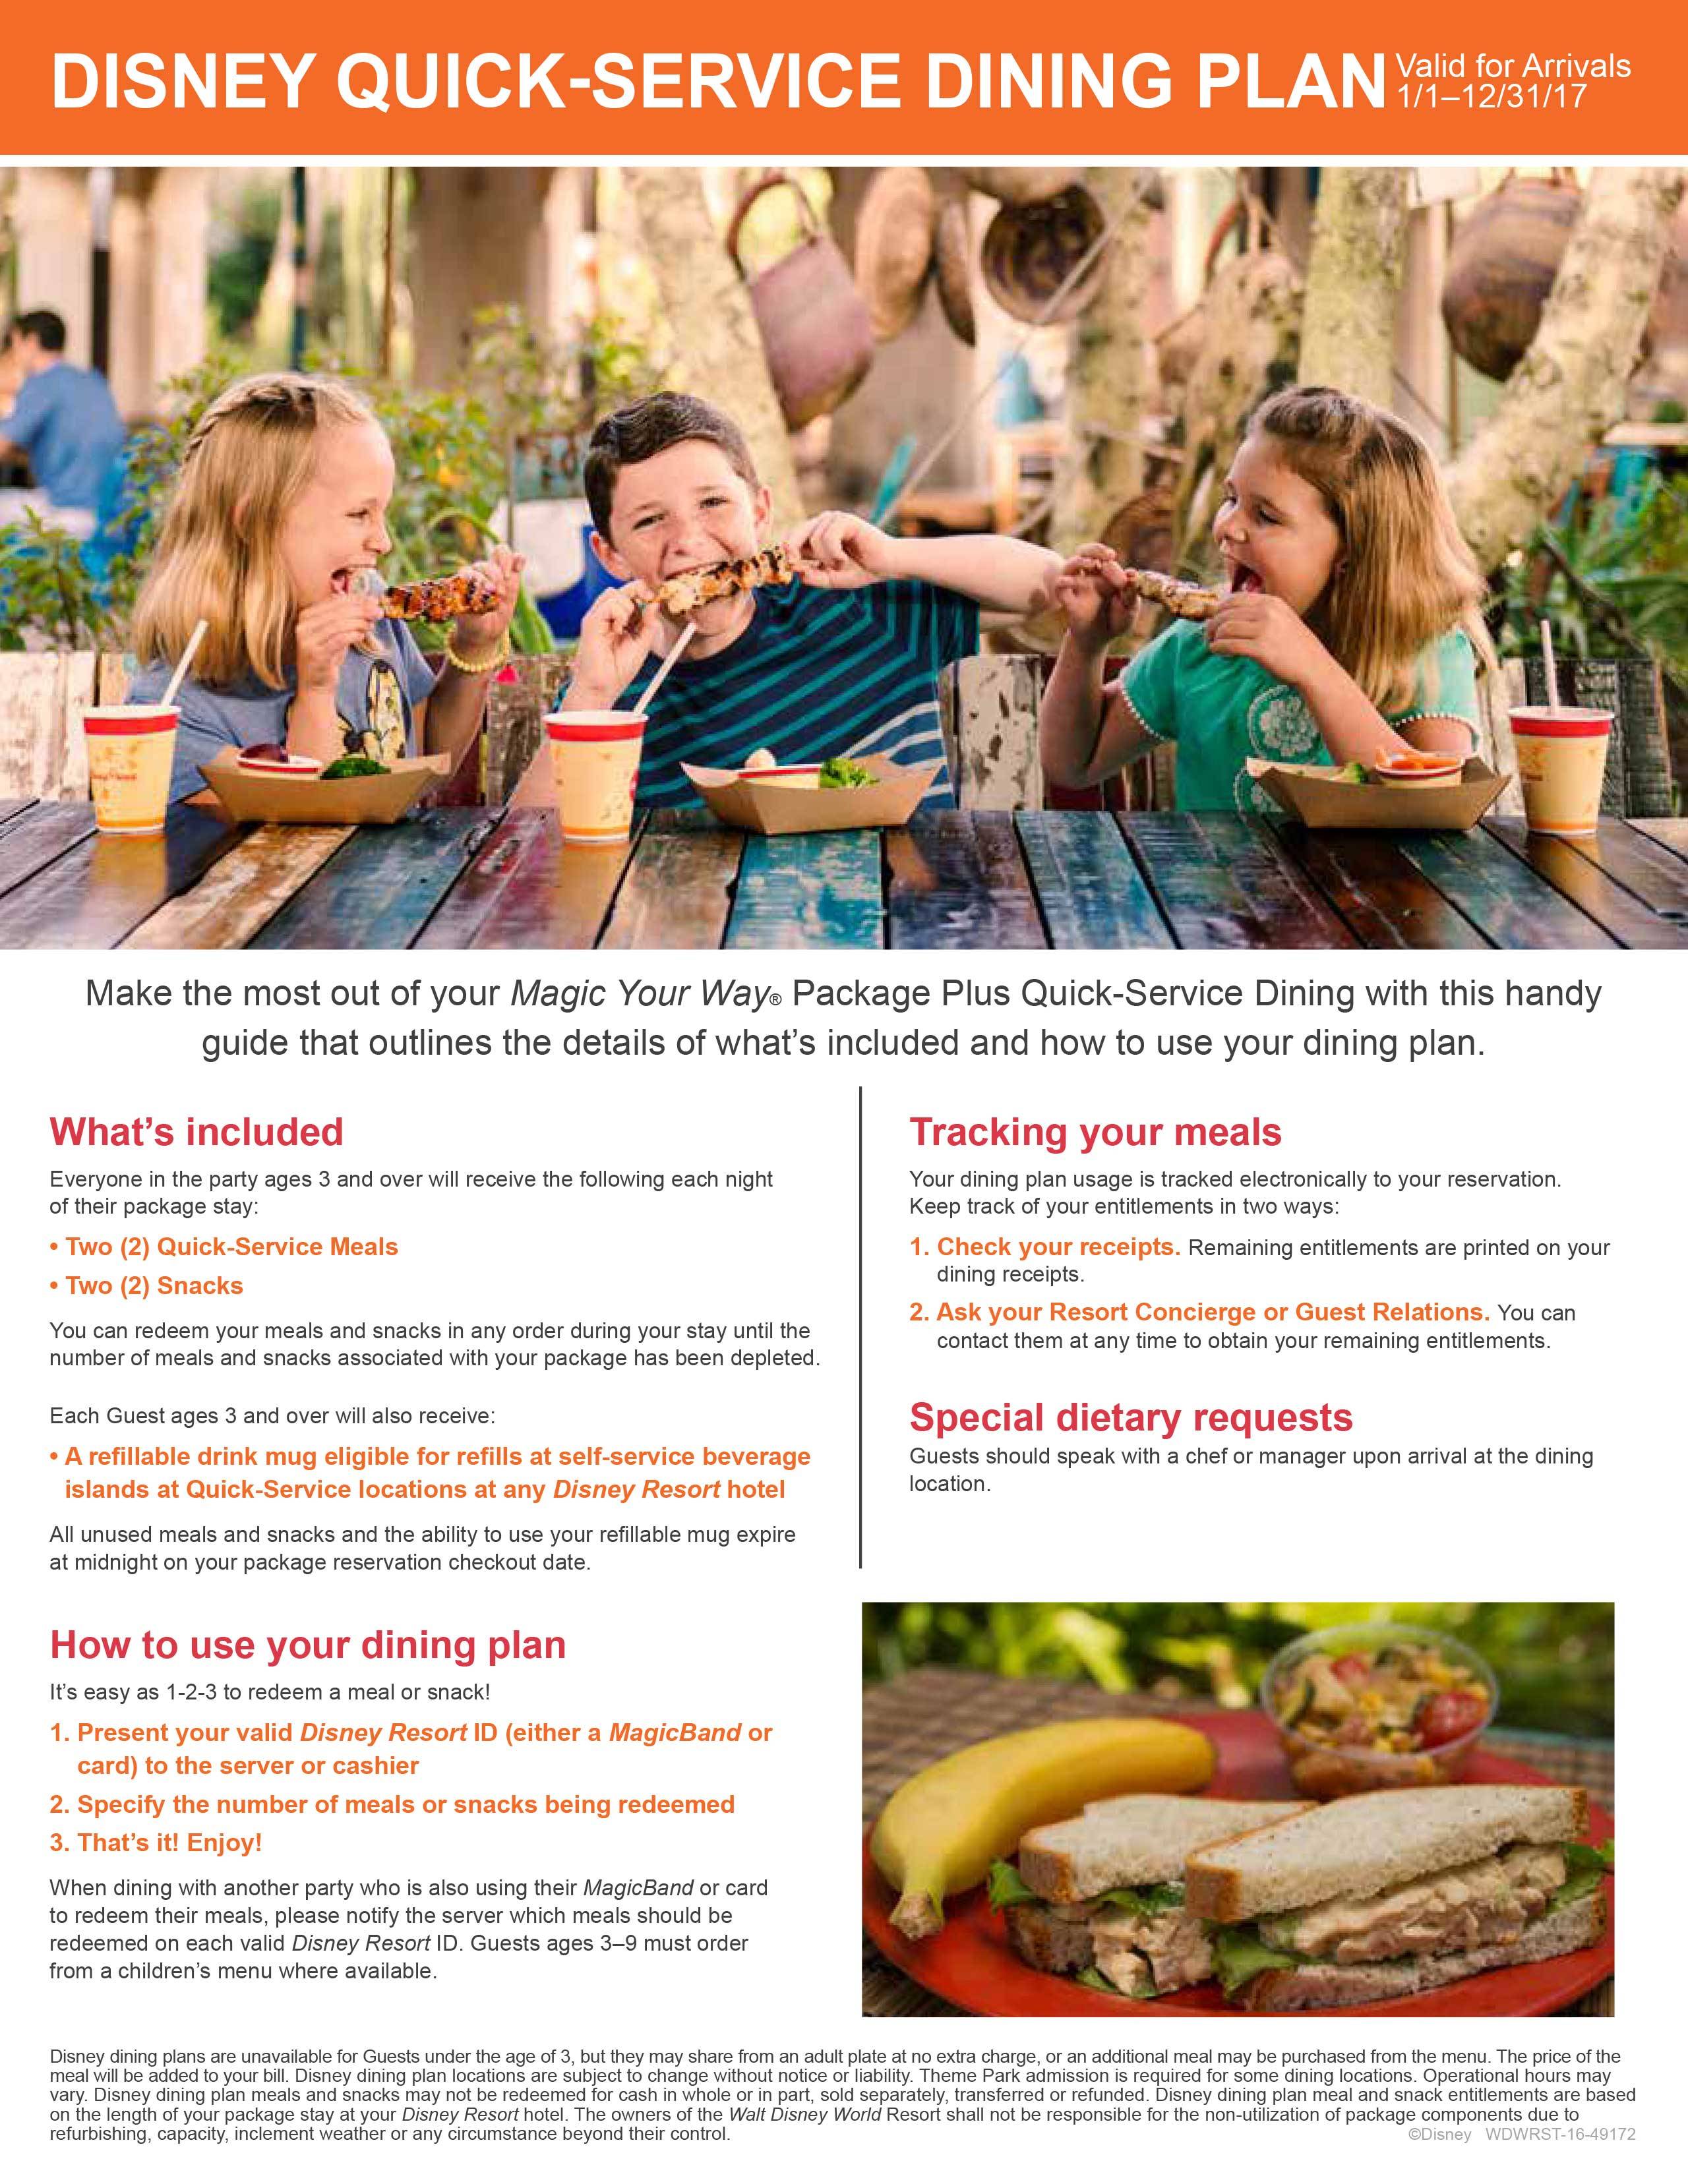 2017 Disney Quick Service Dining Plan brochure - Page 1